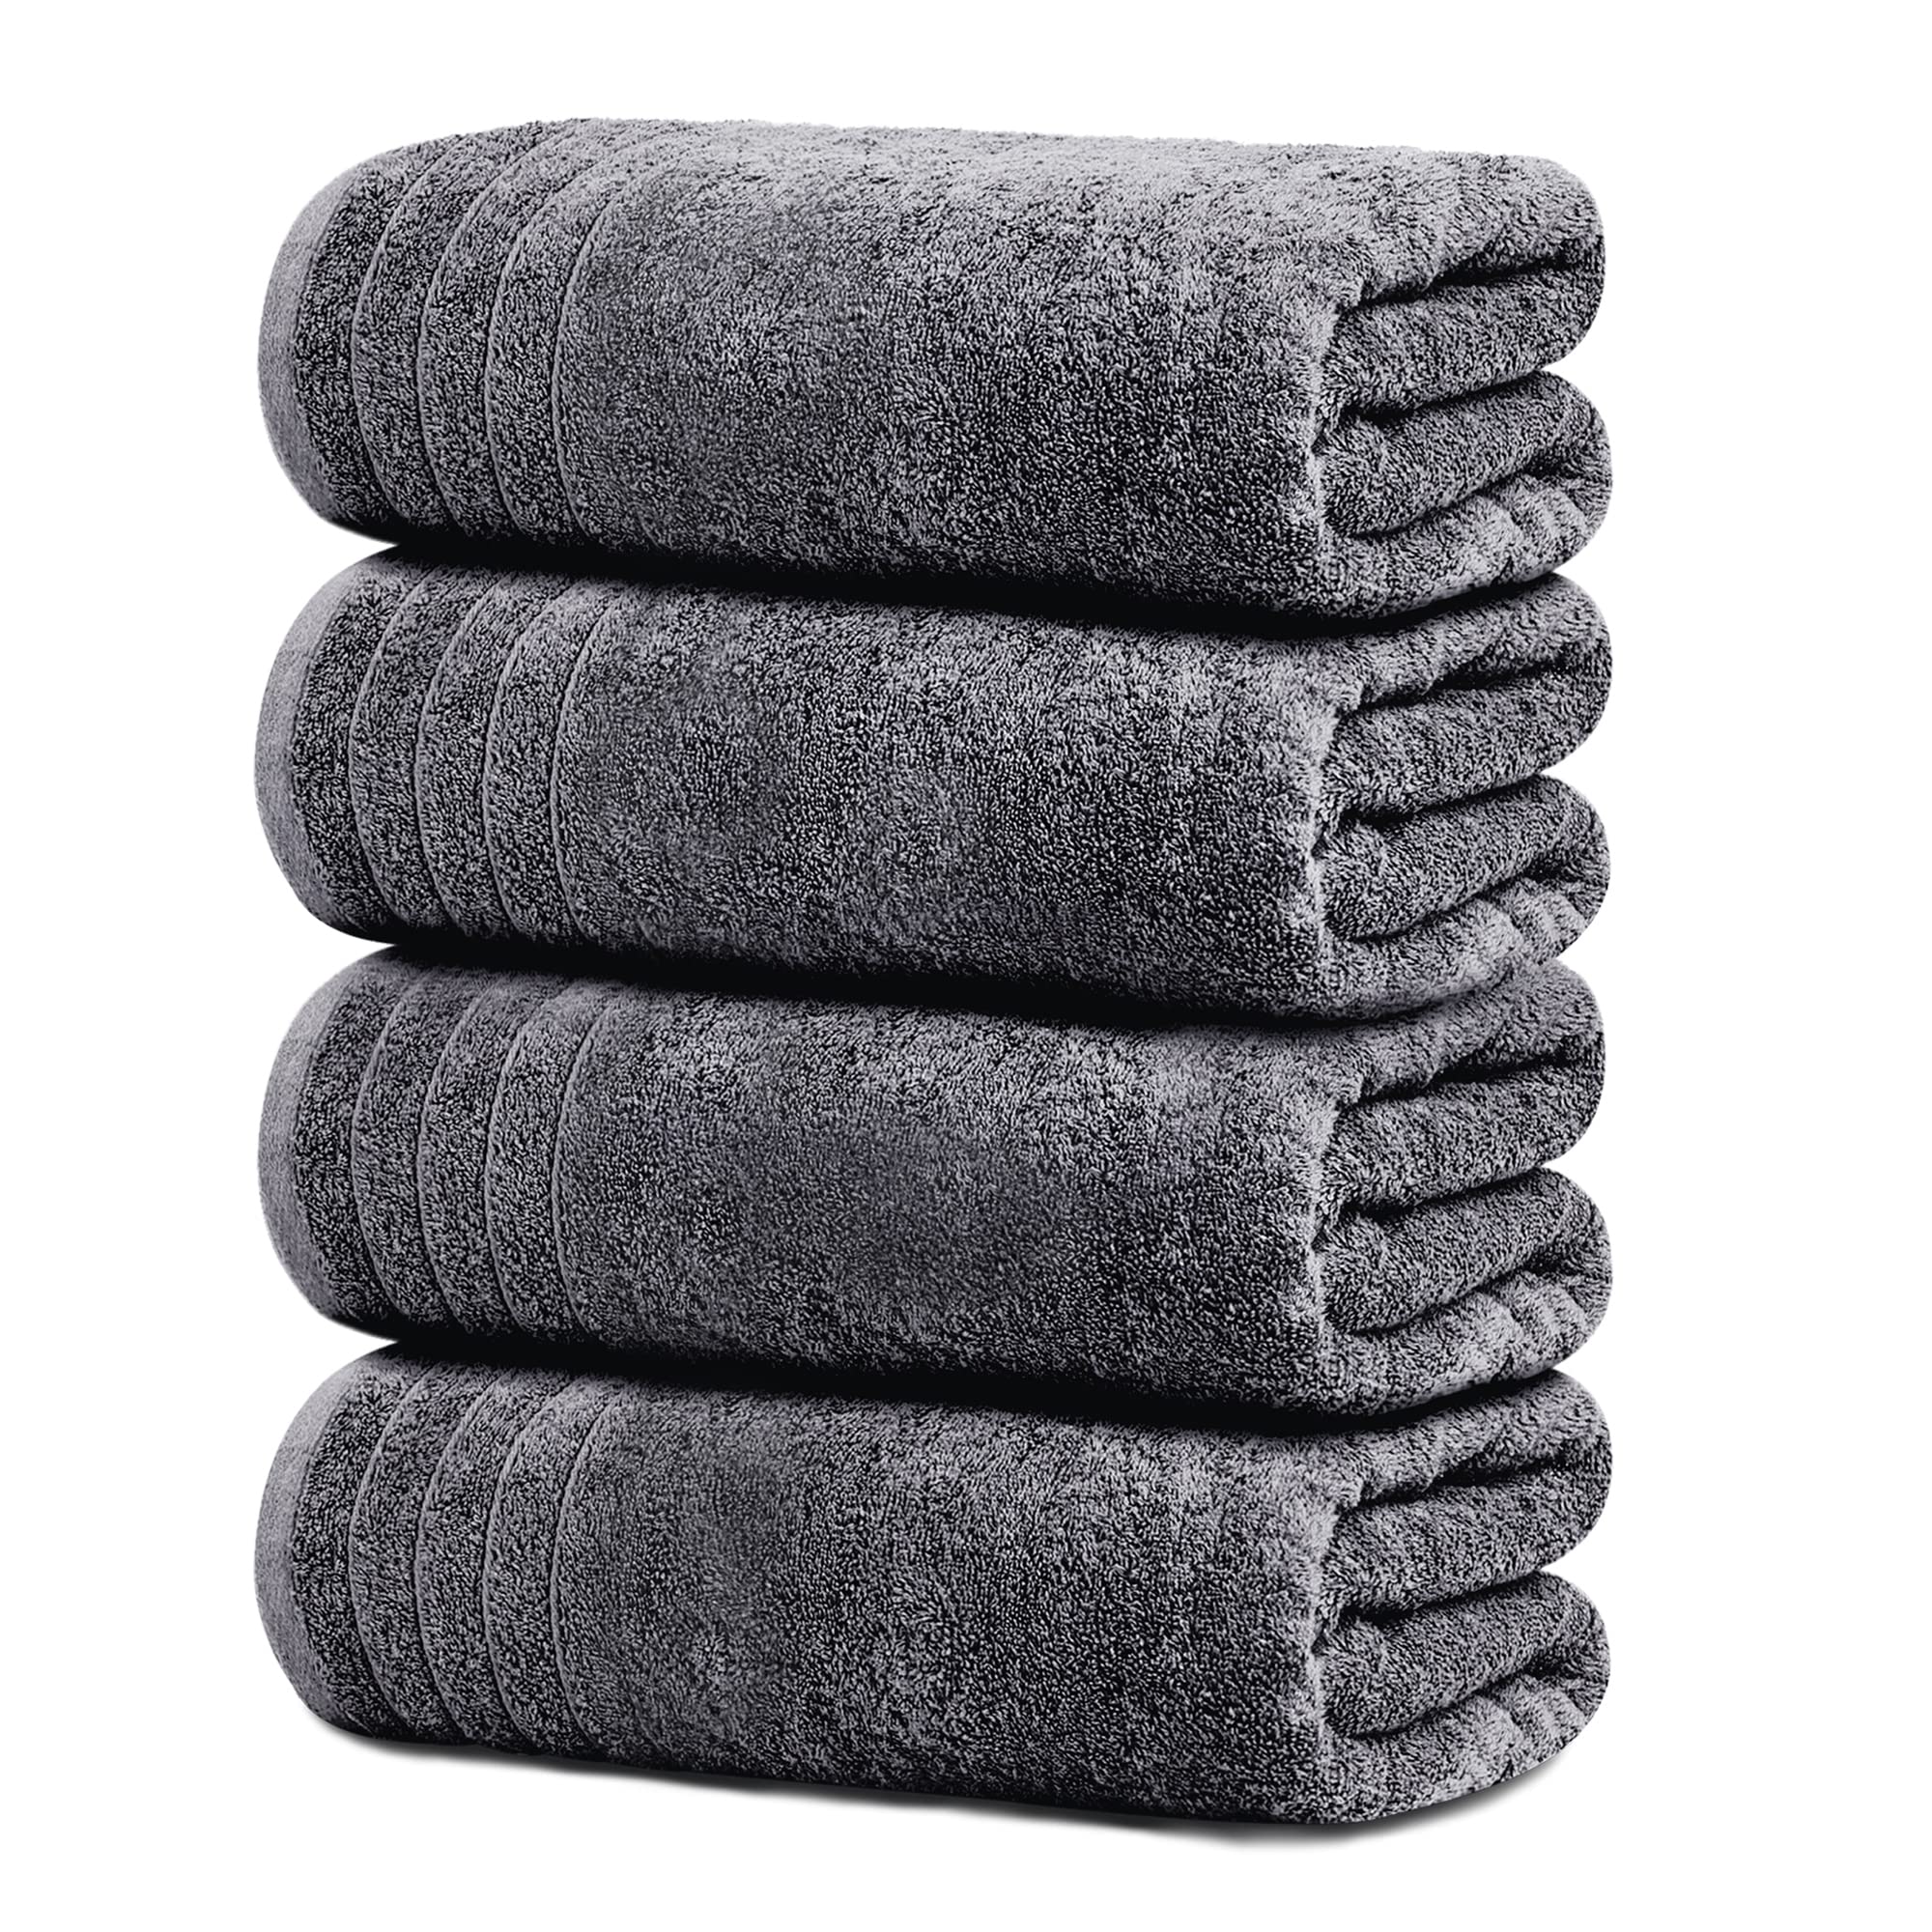 Excellent Absorbency Grey Extra Large Bath Towels for Bathroom